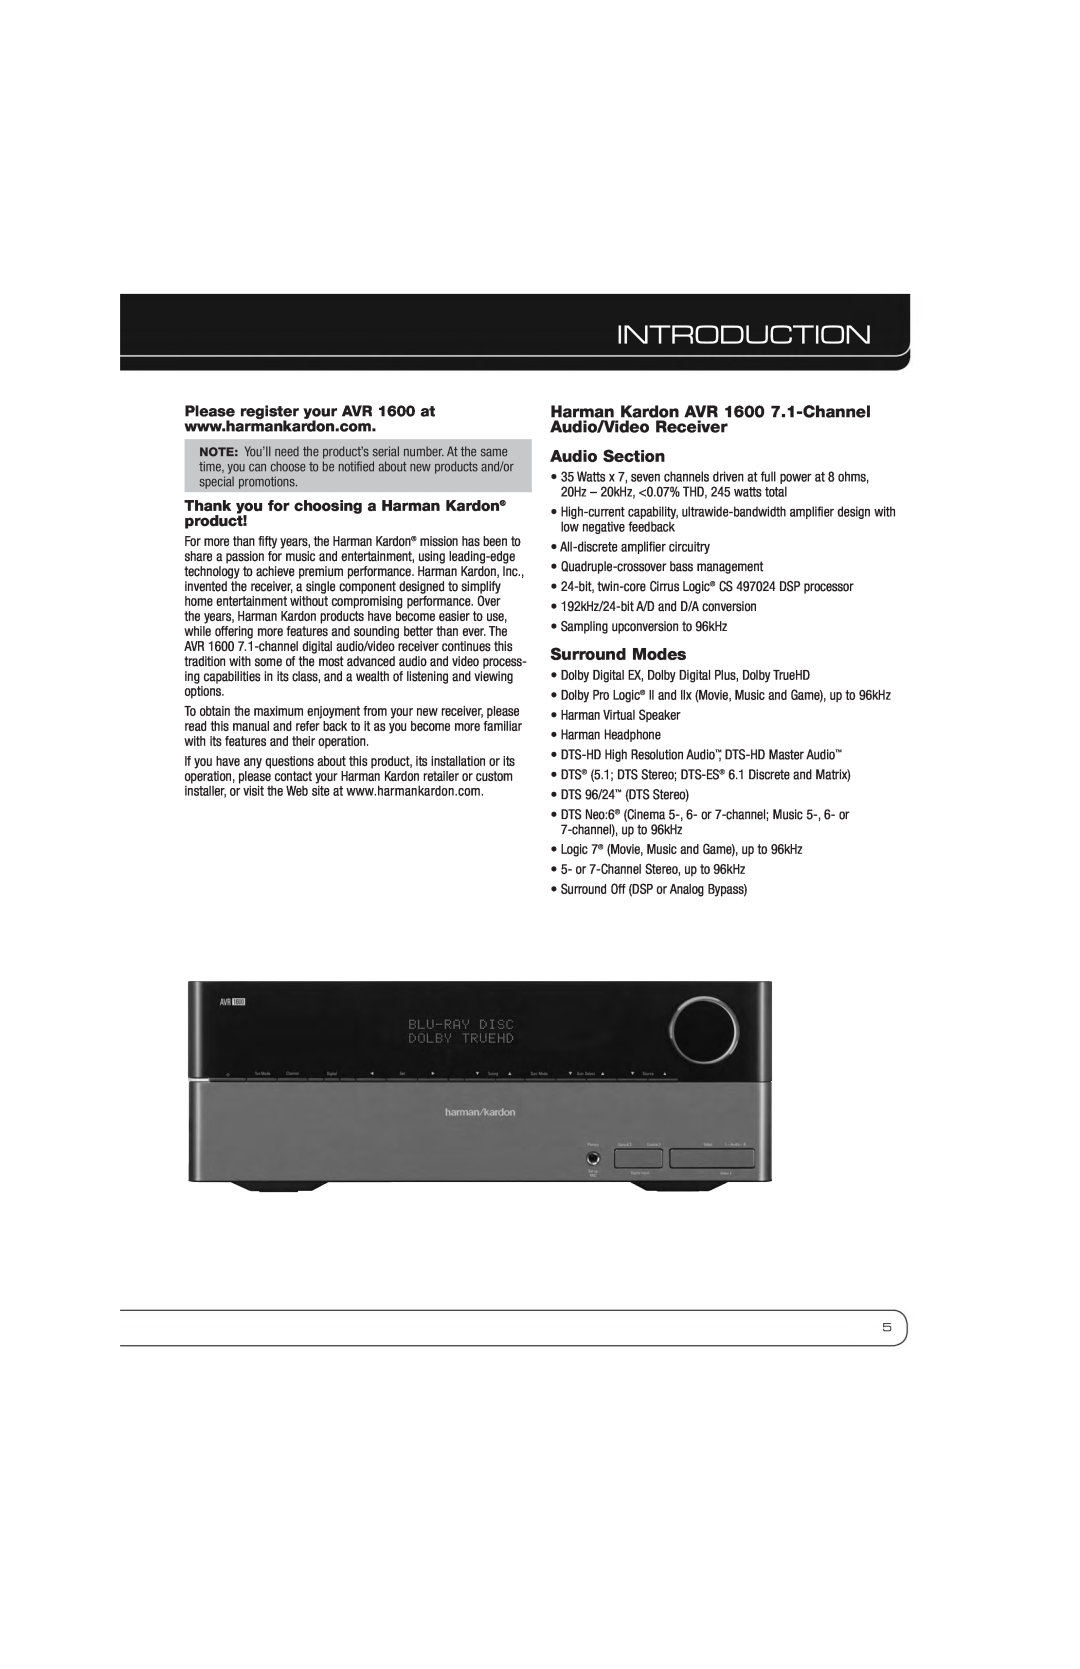 Harman-Kardon owner manual Introduction, Audio Section, Surround Modes, Please register your AVR 1600 at 